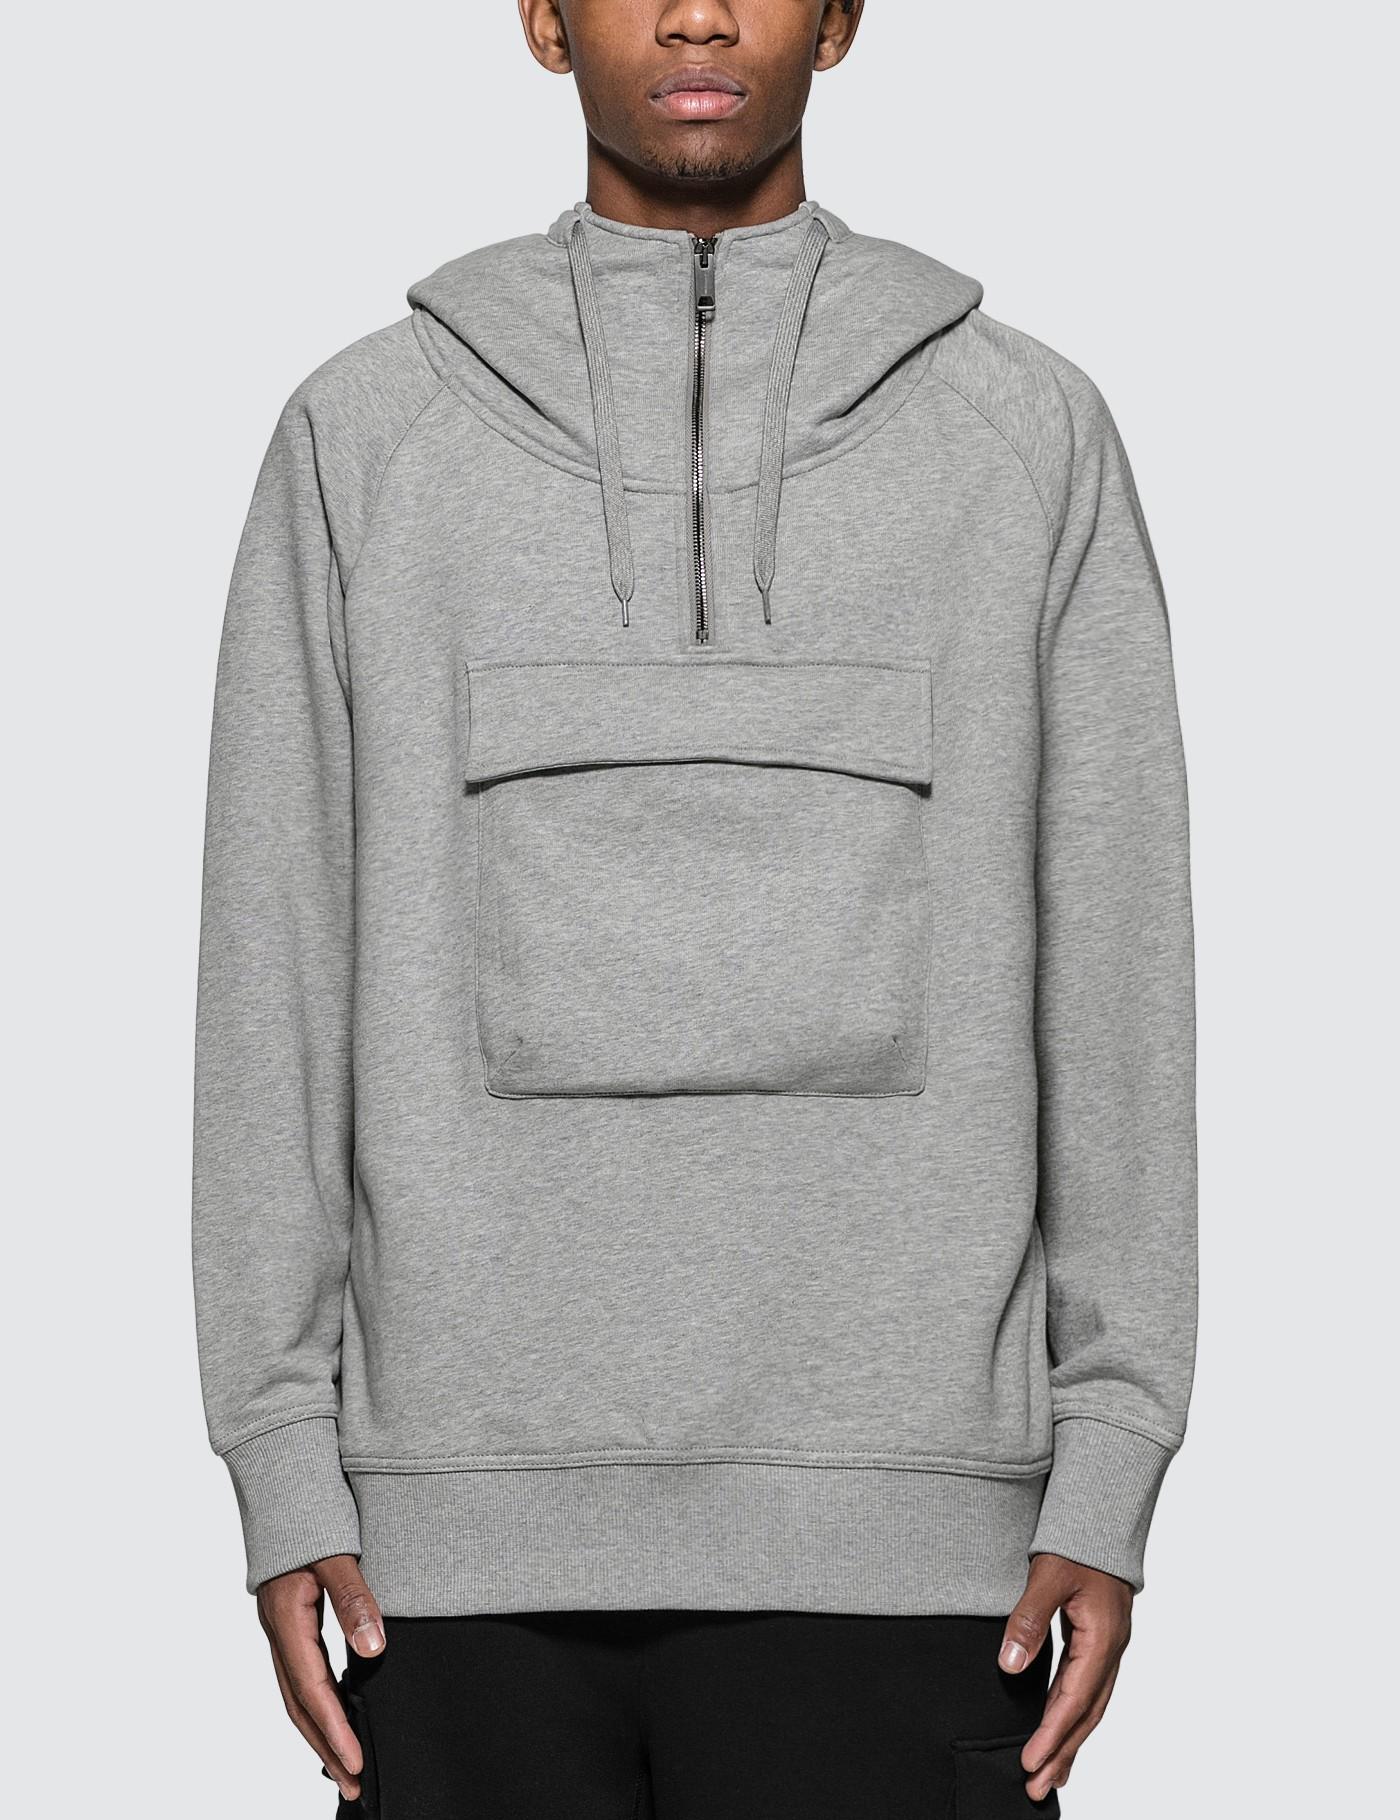 Burberry Horseferry Print Cotton Hoodie in Grey (Gray) for Men - Lyst